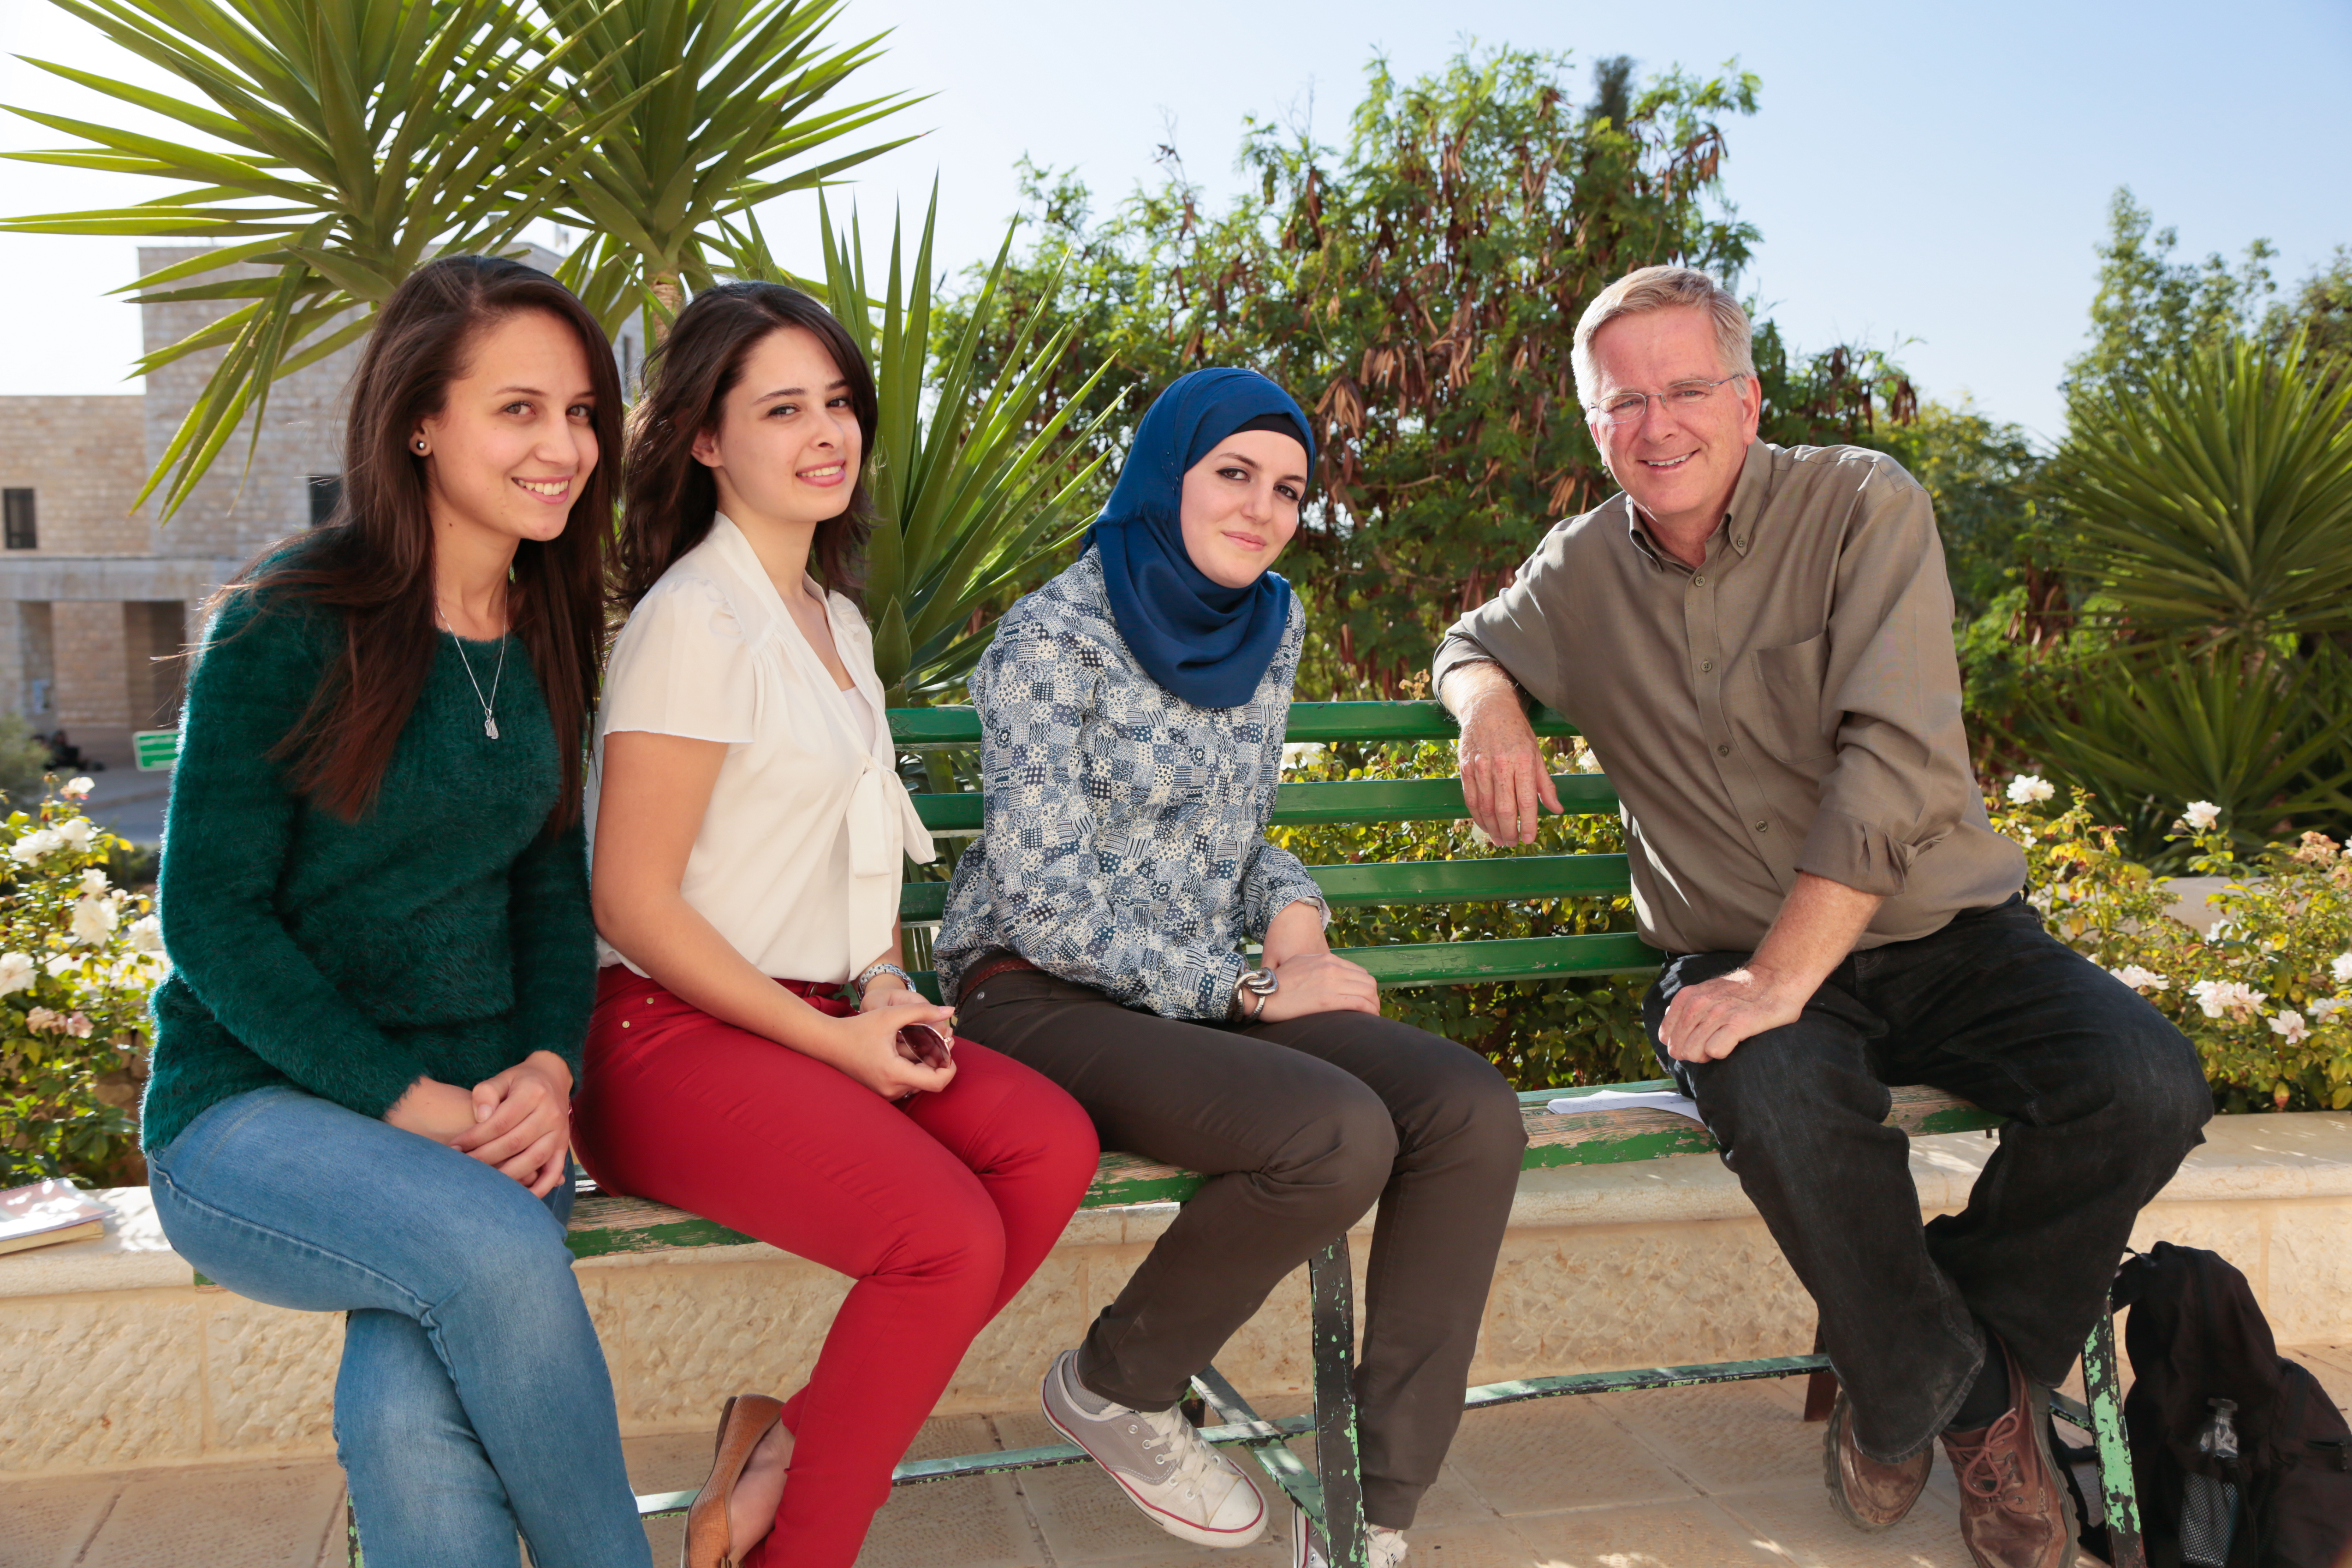 We travel to connect…like with students in Palestine.